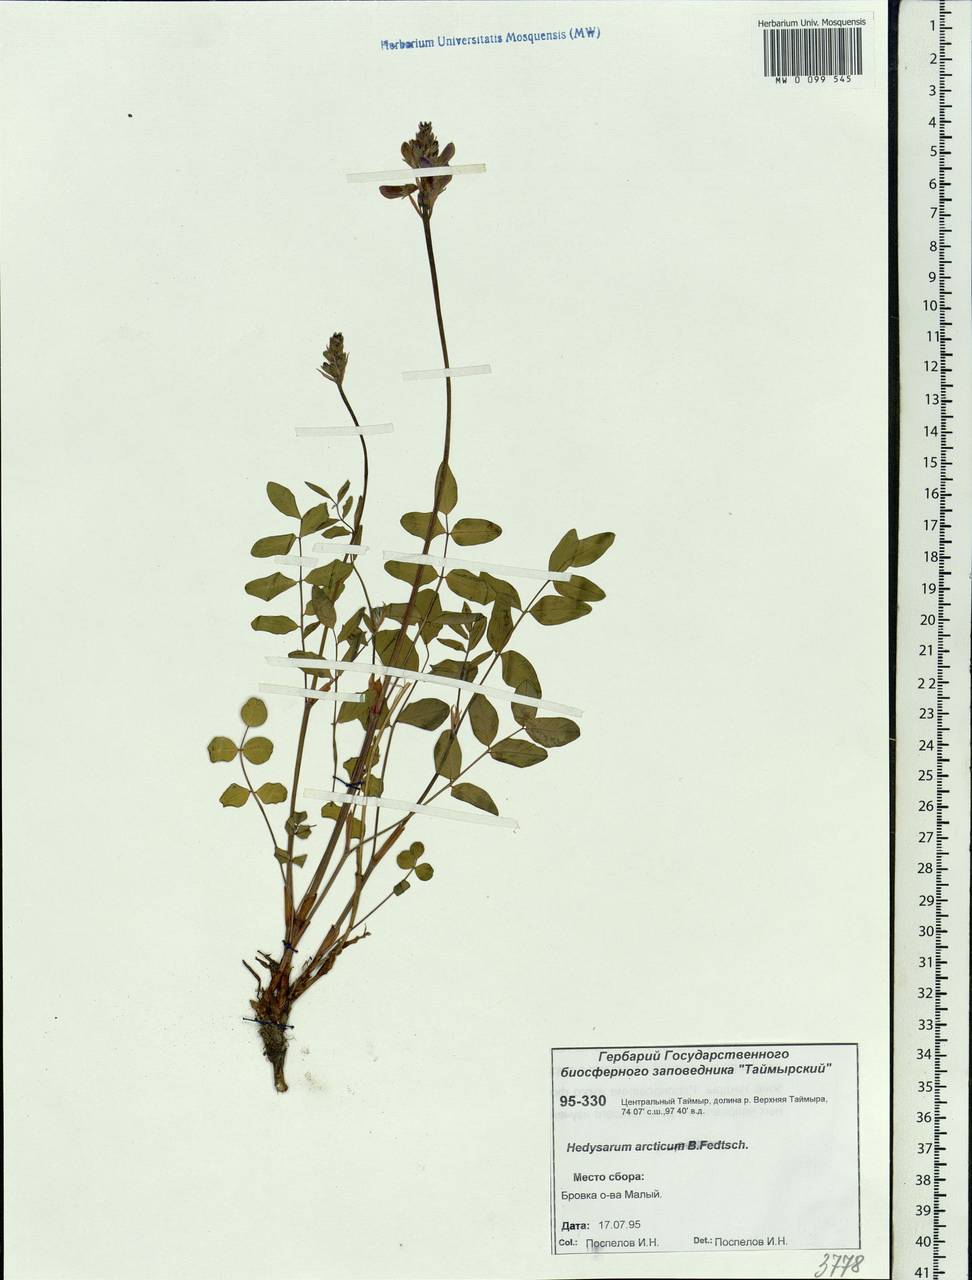 Hedysarum hedysaroides subsp. arcticum (B.Fedtsch.) P.W.Ball, Siberia, Central Siberia (S3) (Russia)